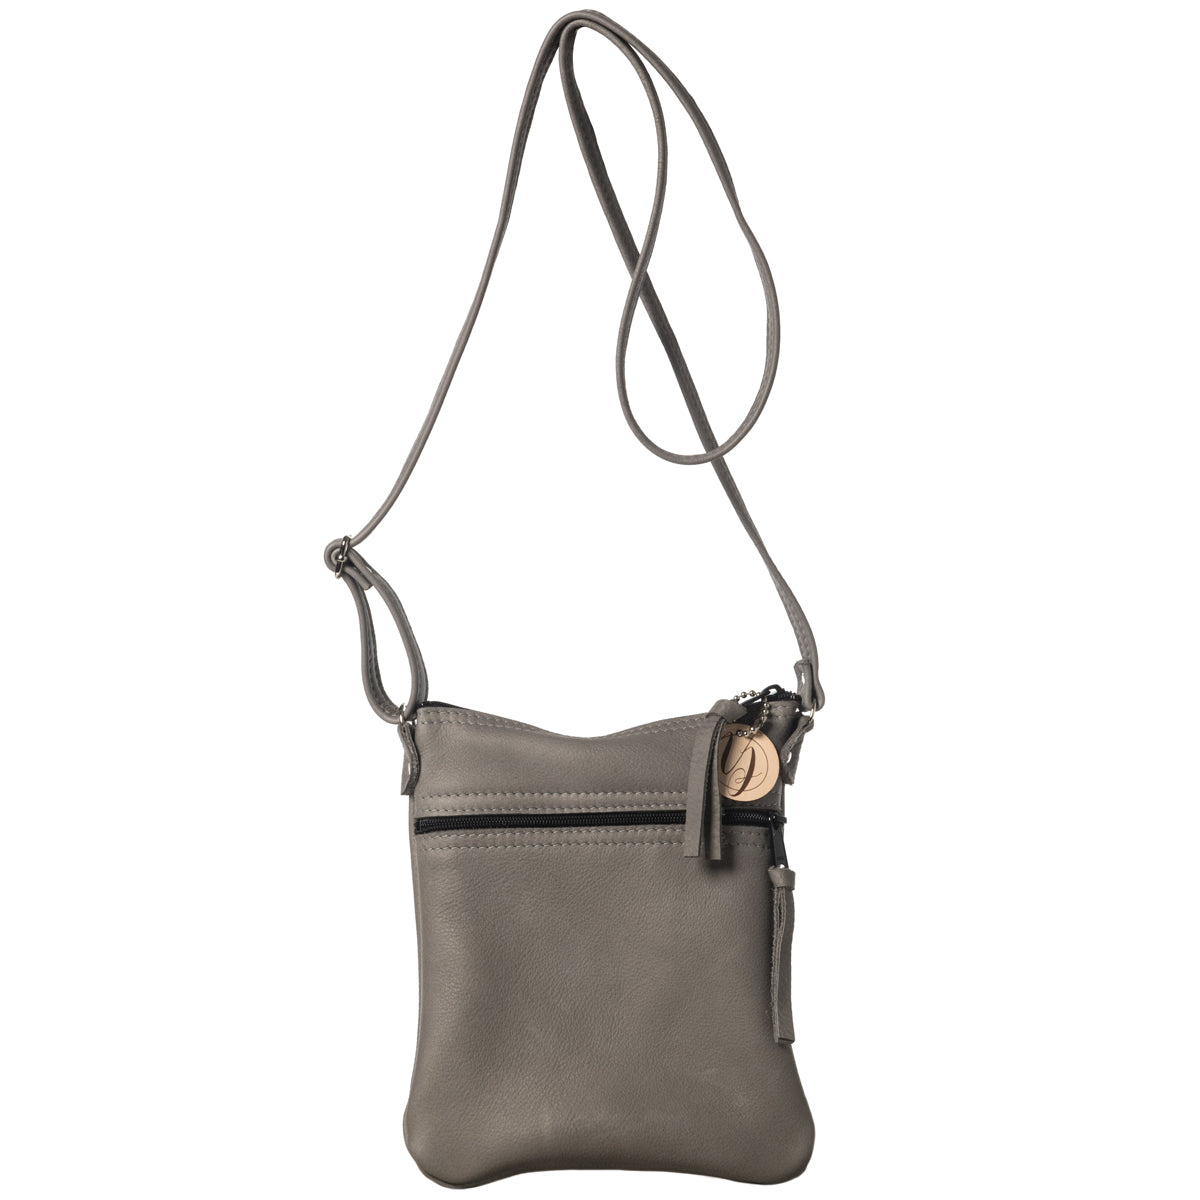 Grey leather cross-body bag handmade in the USA by Vicki Jean. 